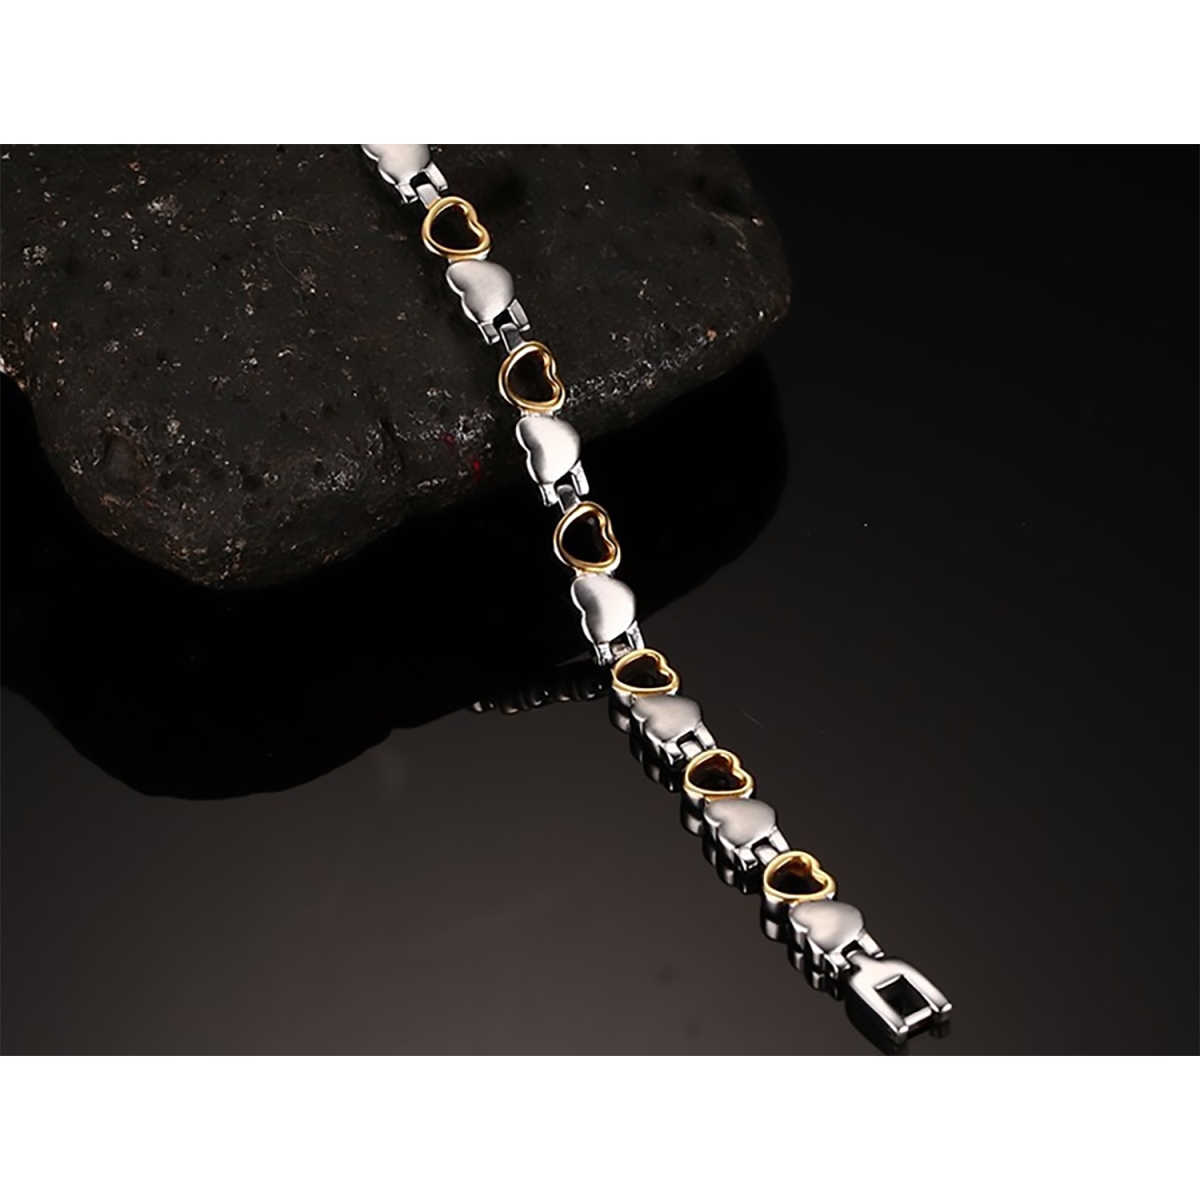 Picture of Adore 30386470 Stainless Steel Heart Bracelet